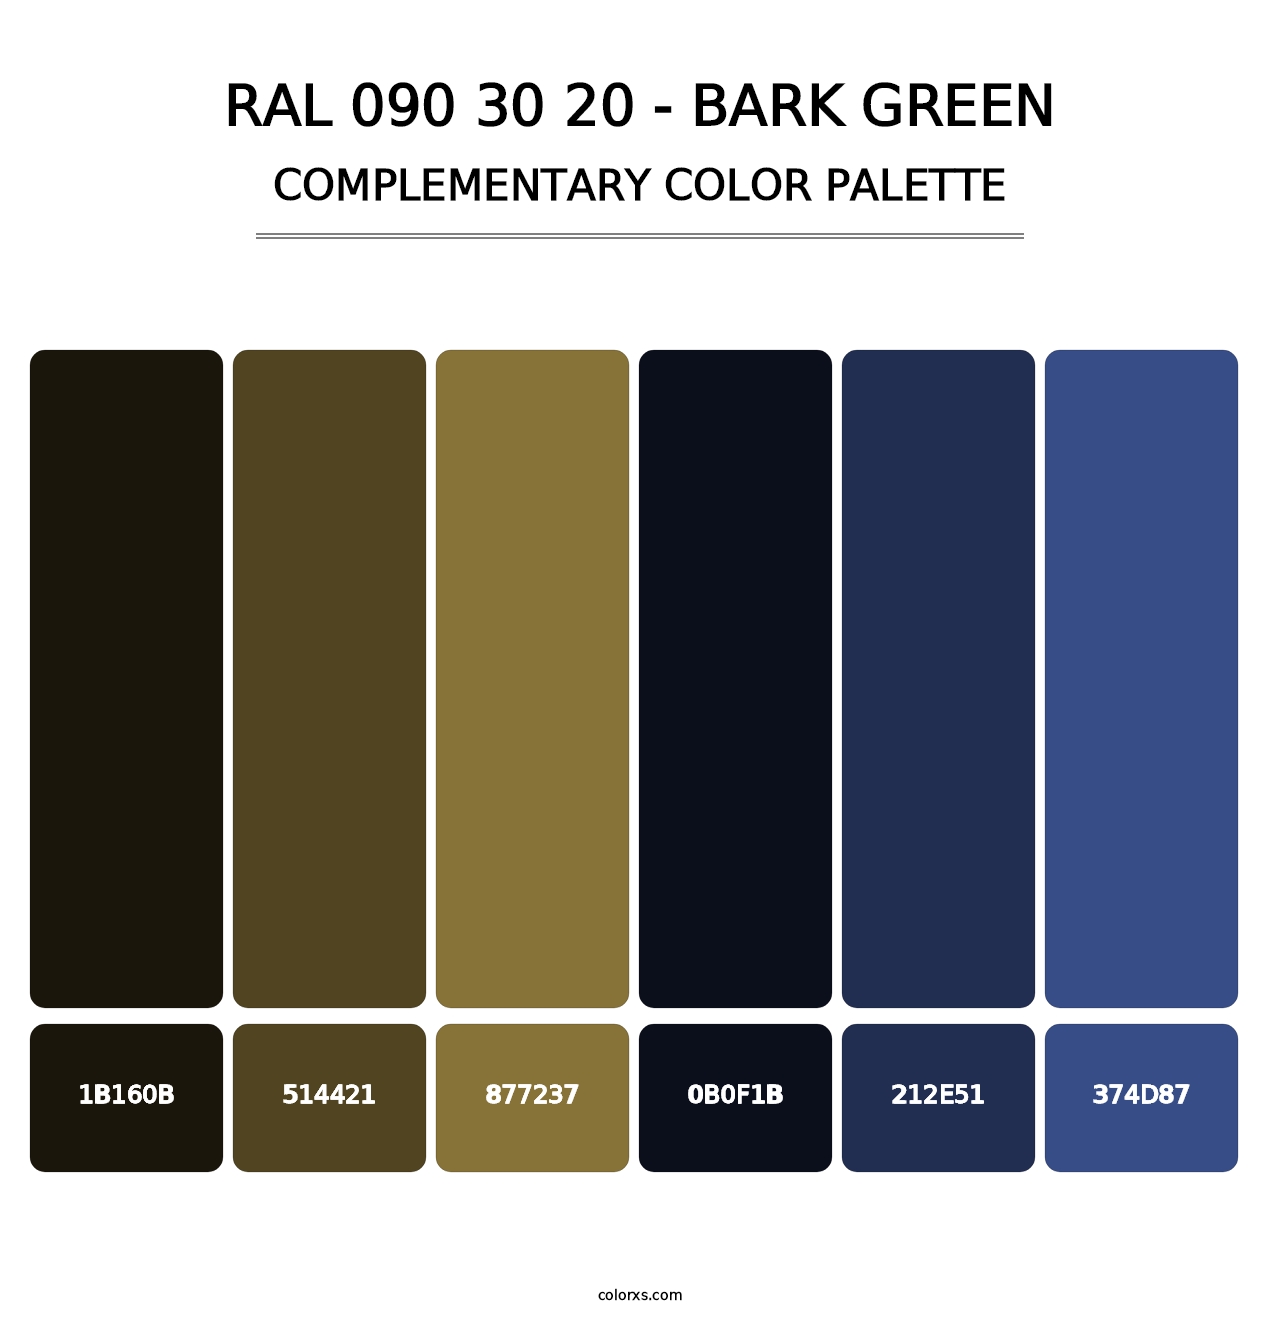 RAL 090 30 20 - Bark Green - Complementary Color Palette